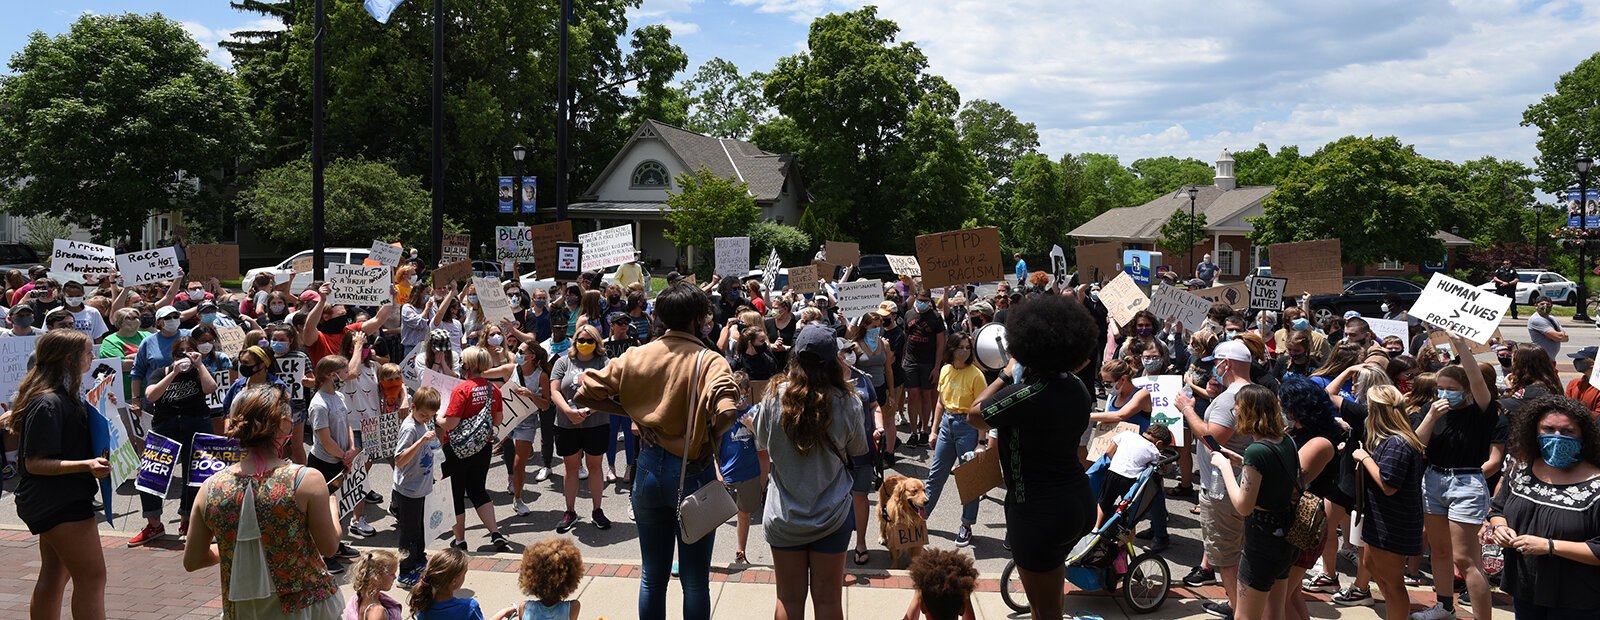 Protesters gathered and marched in Fort Thomas on June 13.